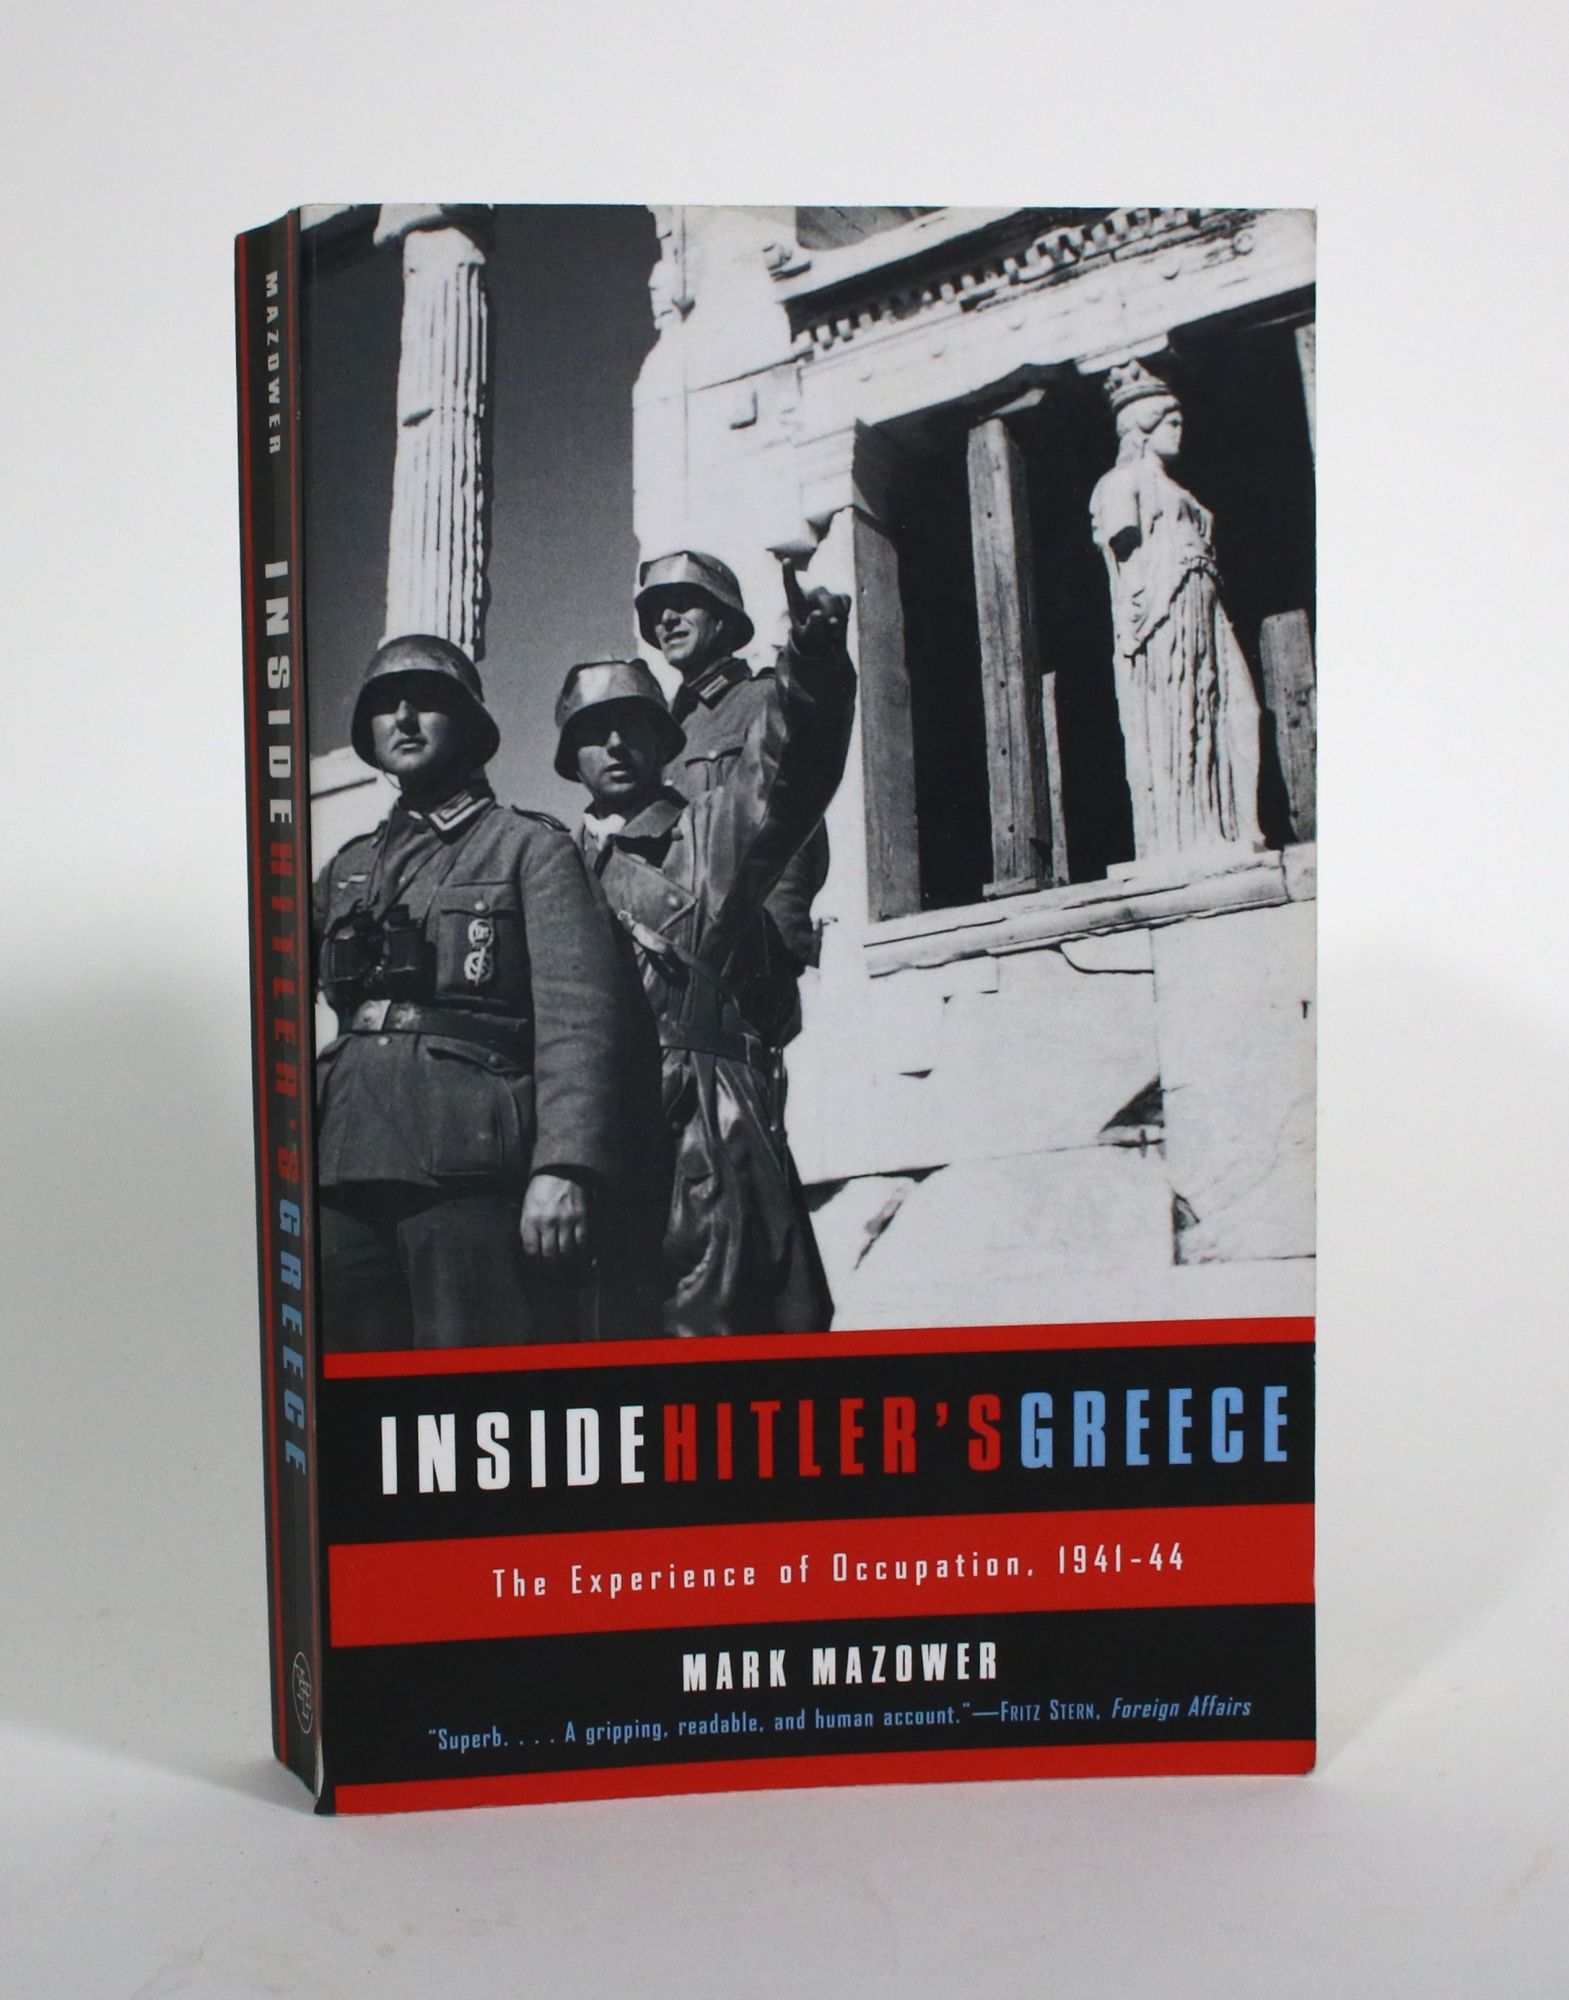 Inside Hitler's Greece: The Experience of Occupation 1941-44 - Mazower, Mark